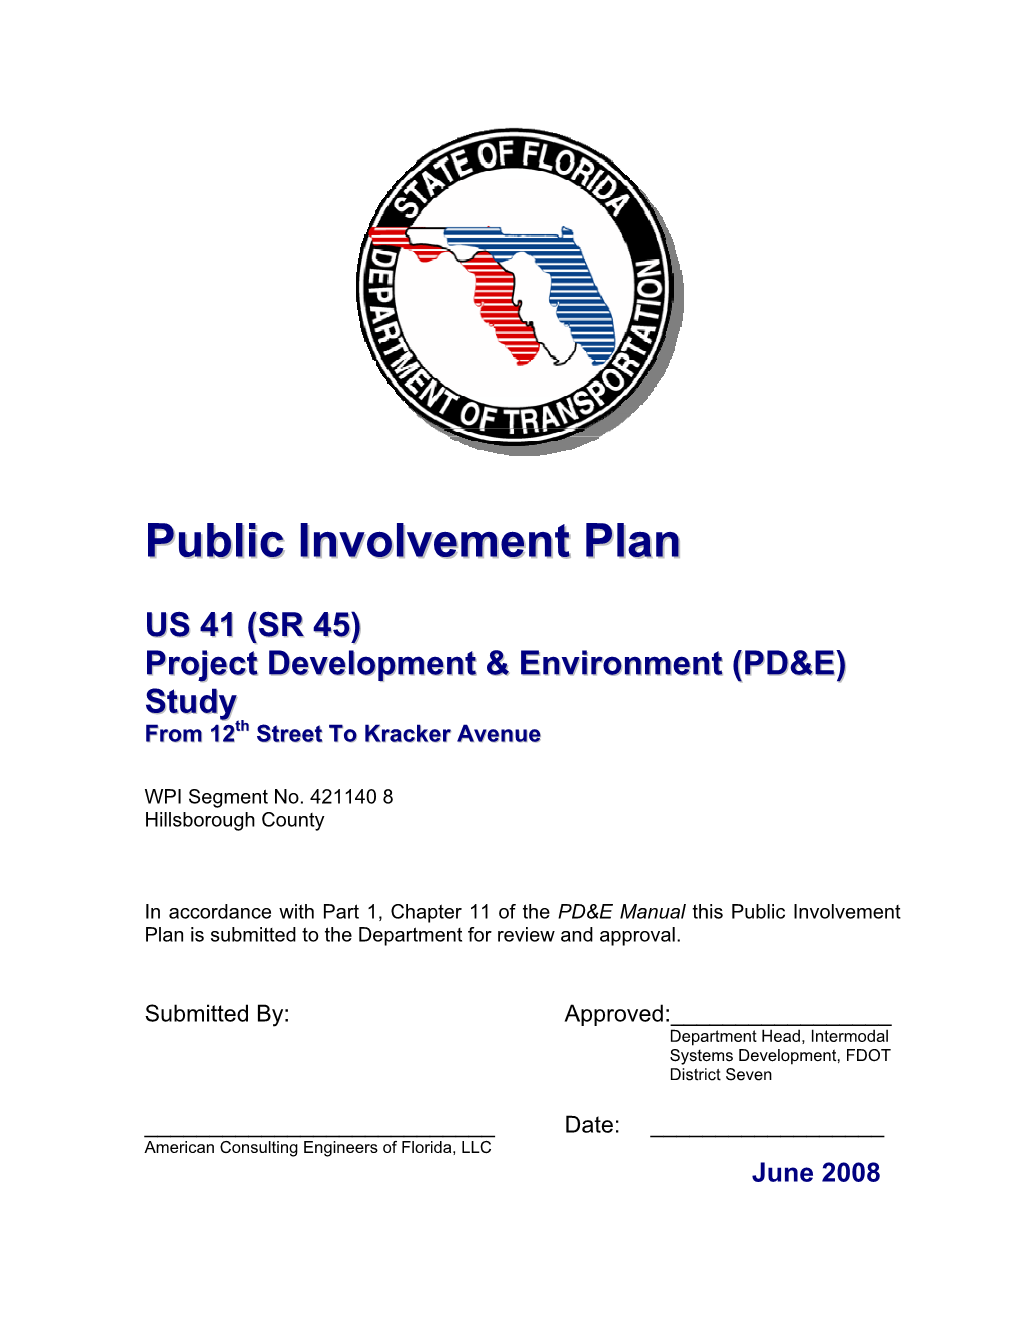 Public Involvement Plan Is Submitted to the Department for Review and Approval